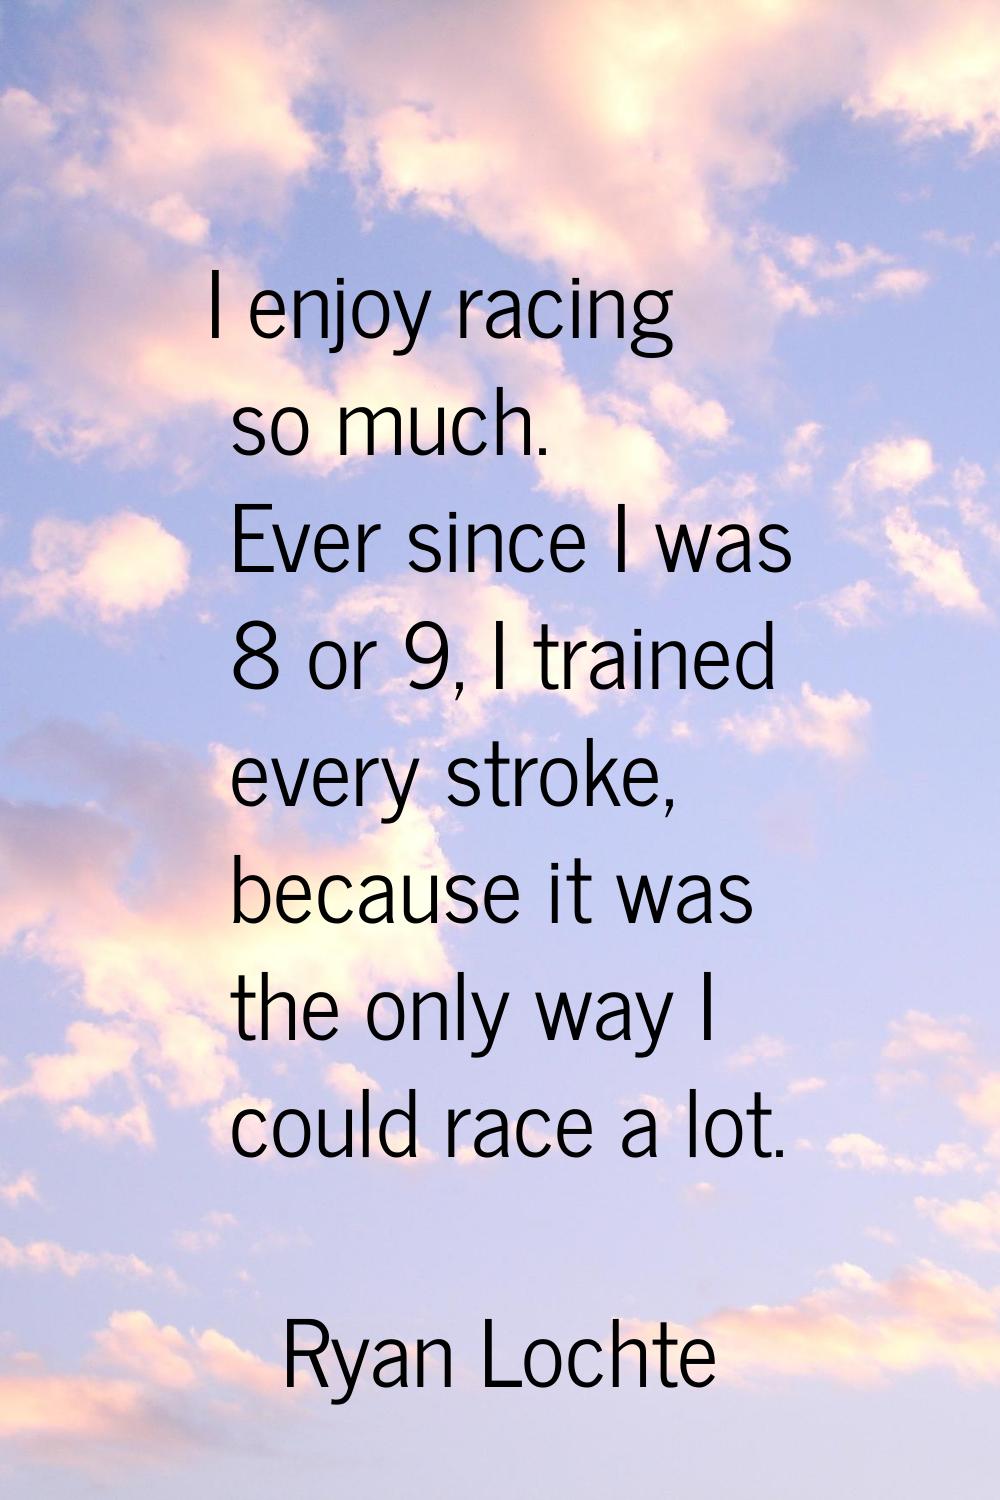 I enjoy racing so much. Ever since I was 8 or 9, I trained every stroke, because it was the only wa